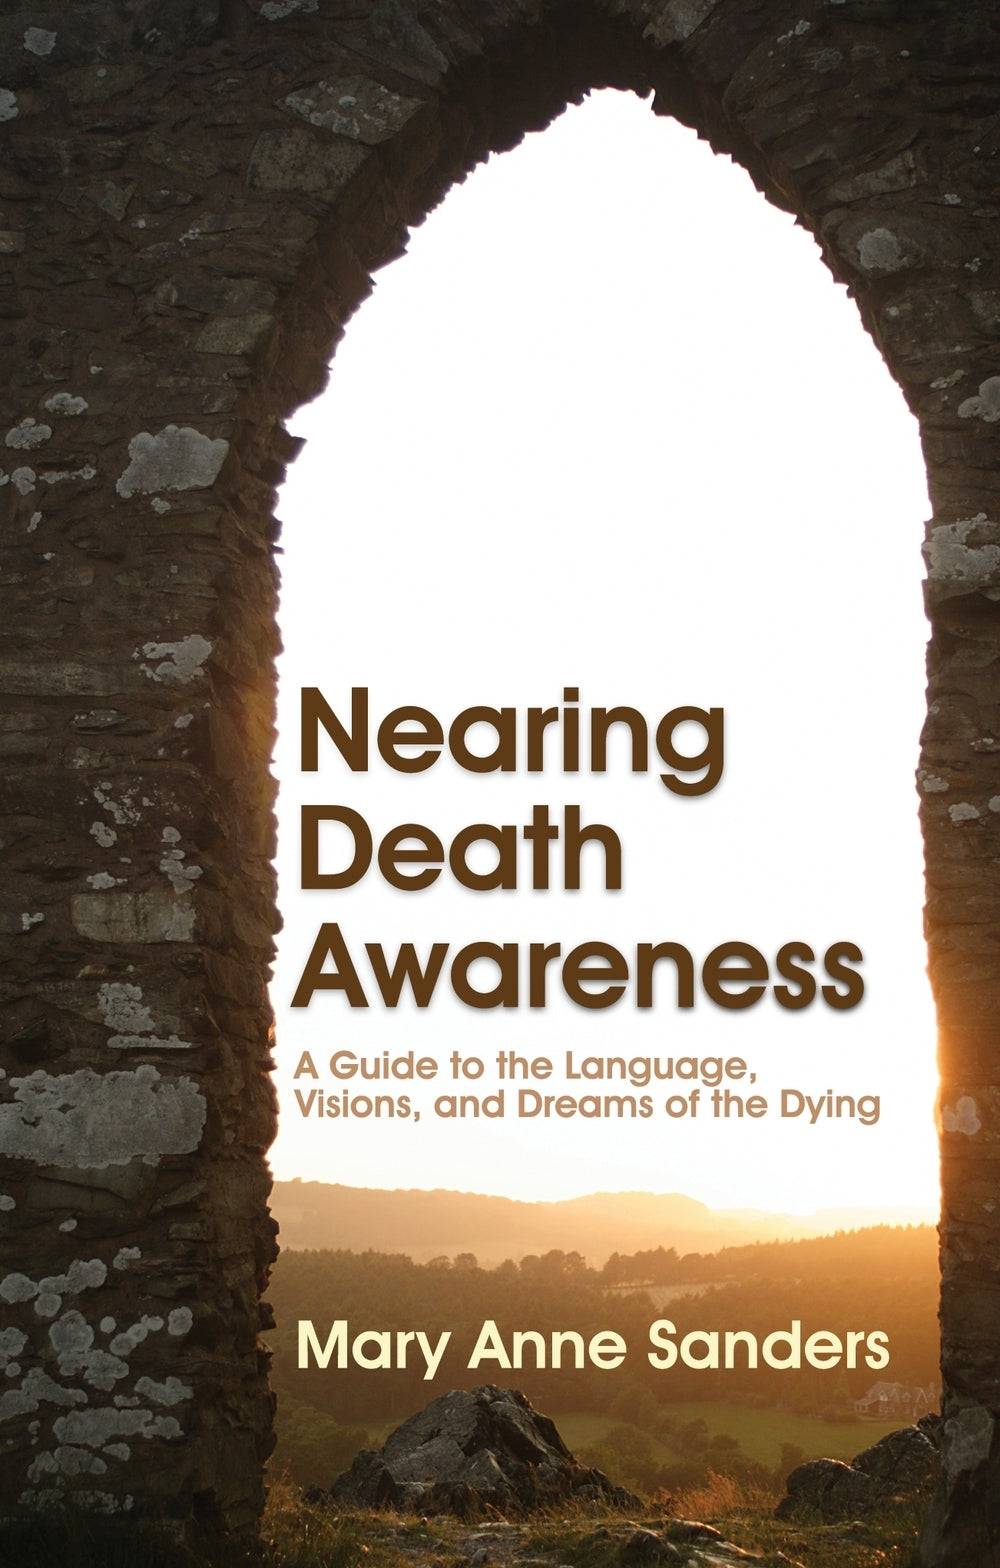 Nearing Death Awareness by Mary Anne Sanders